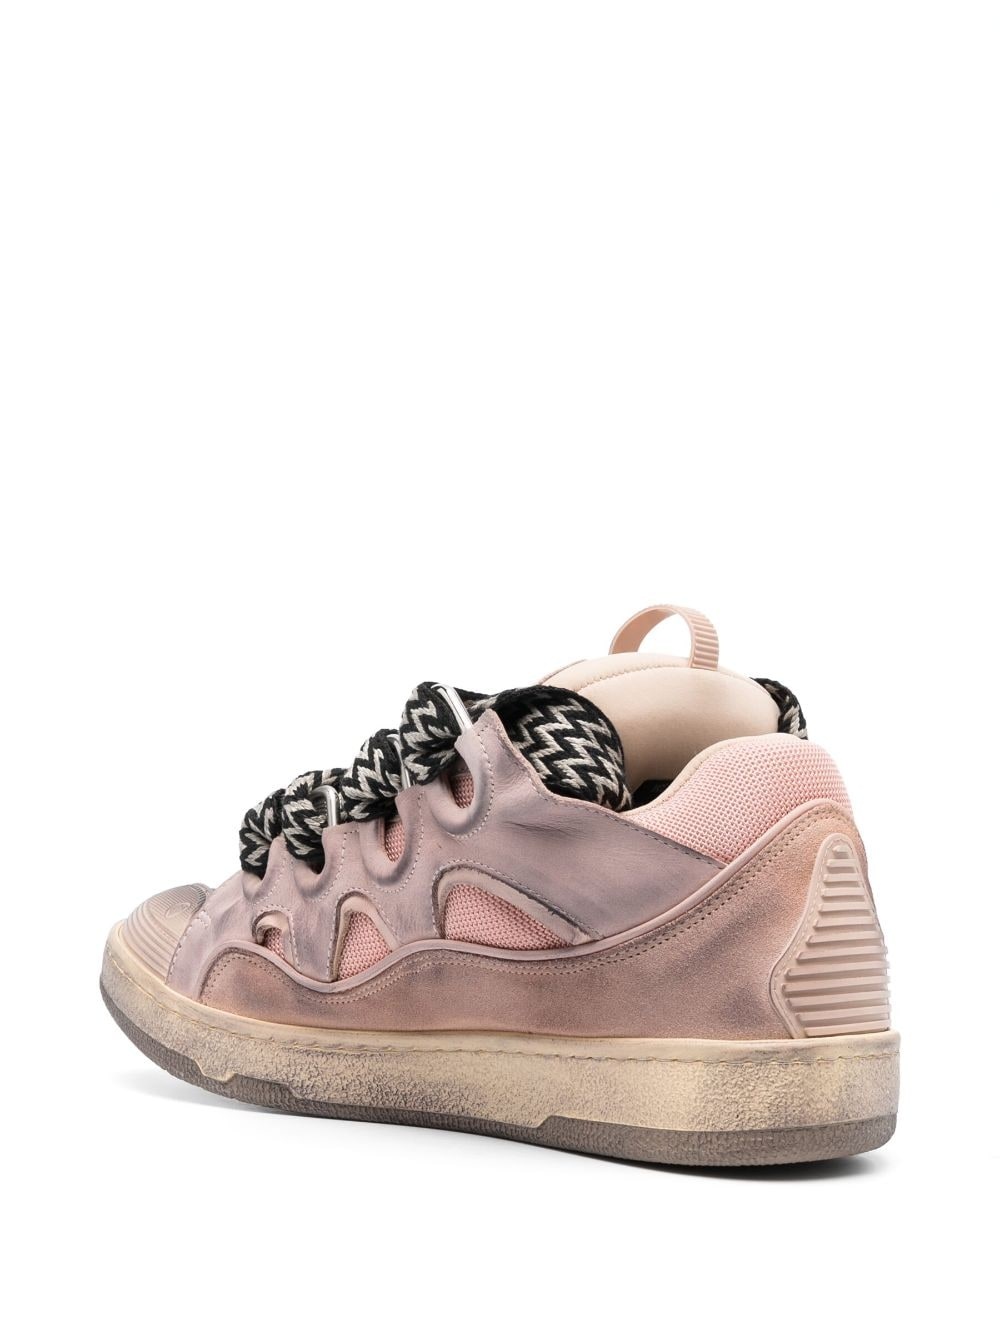 Curb chunky leather sneakers - 3